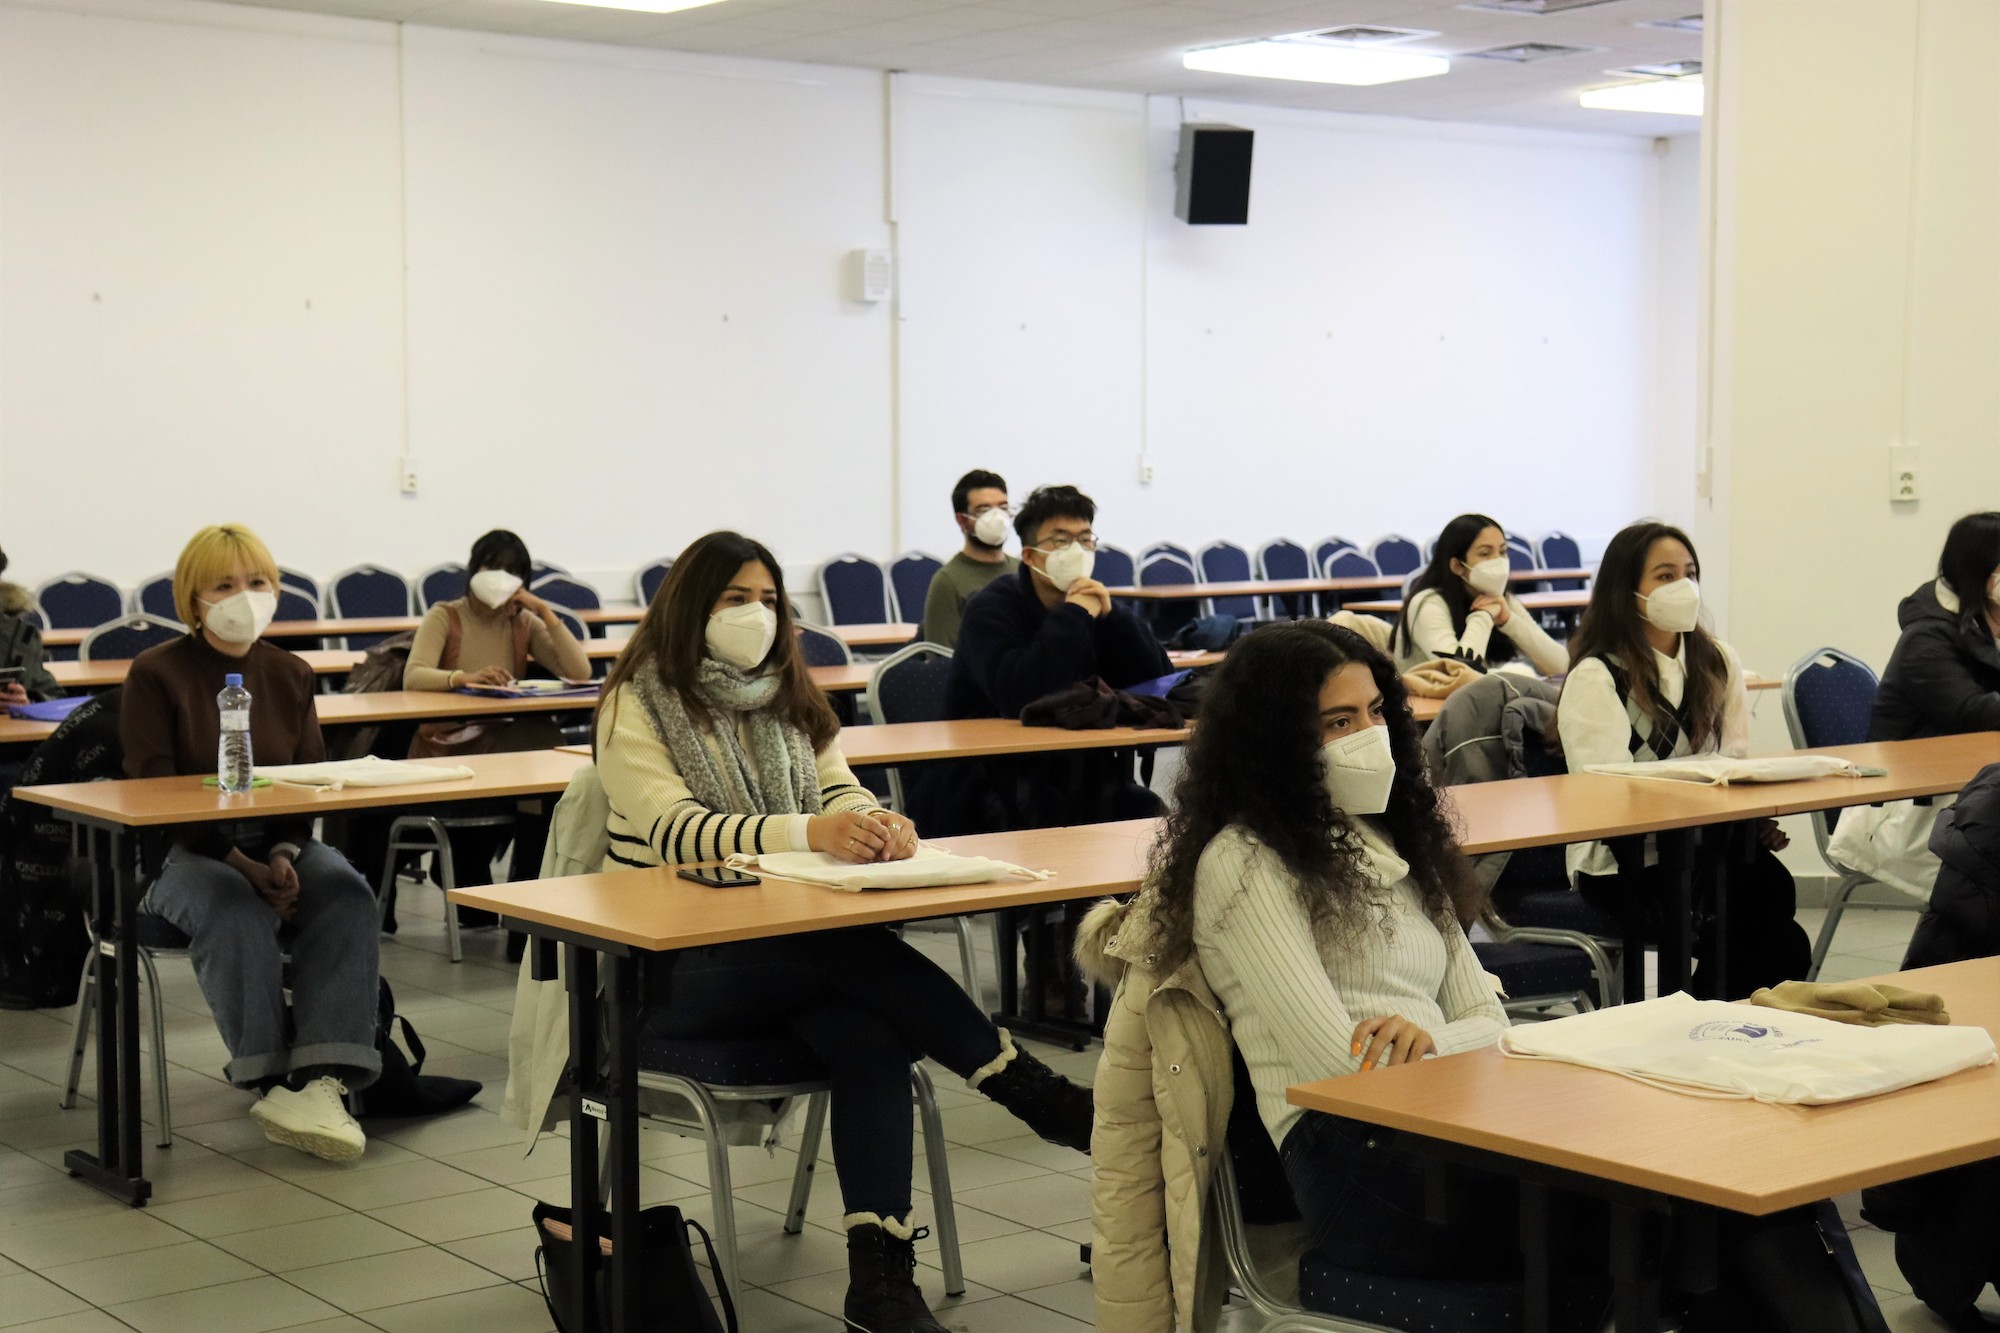 11th edition of the Winter School in cooperation with ESC Rennes, France